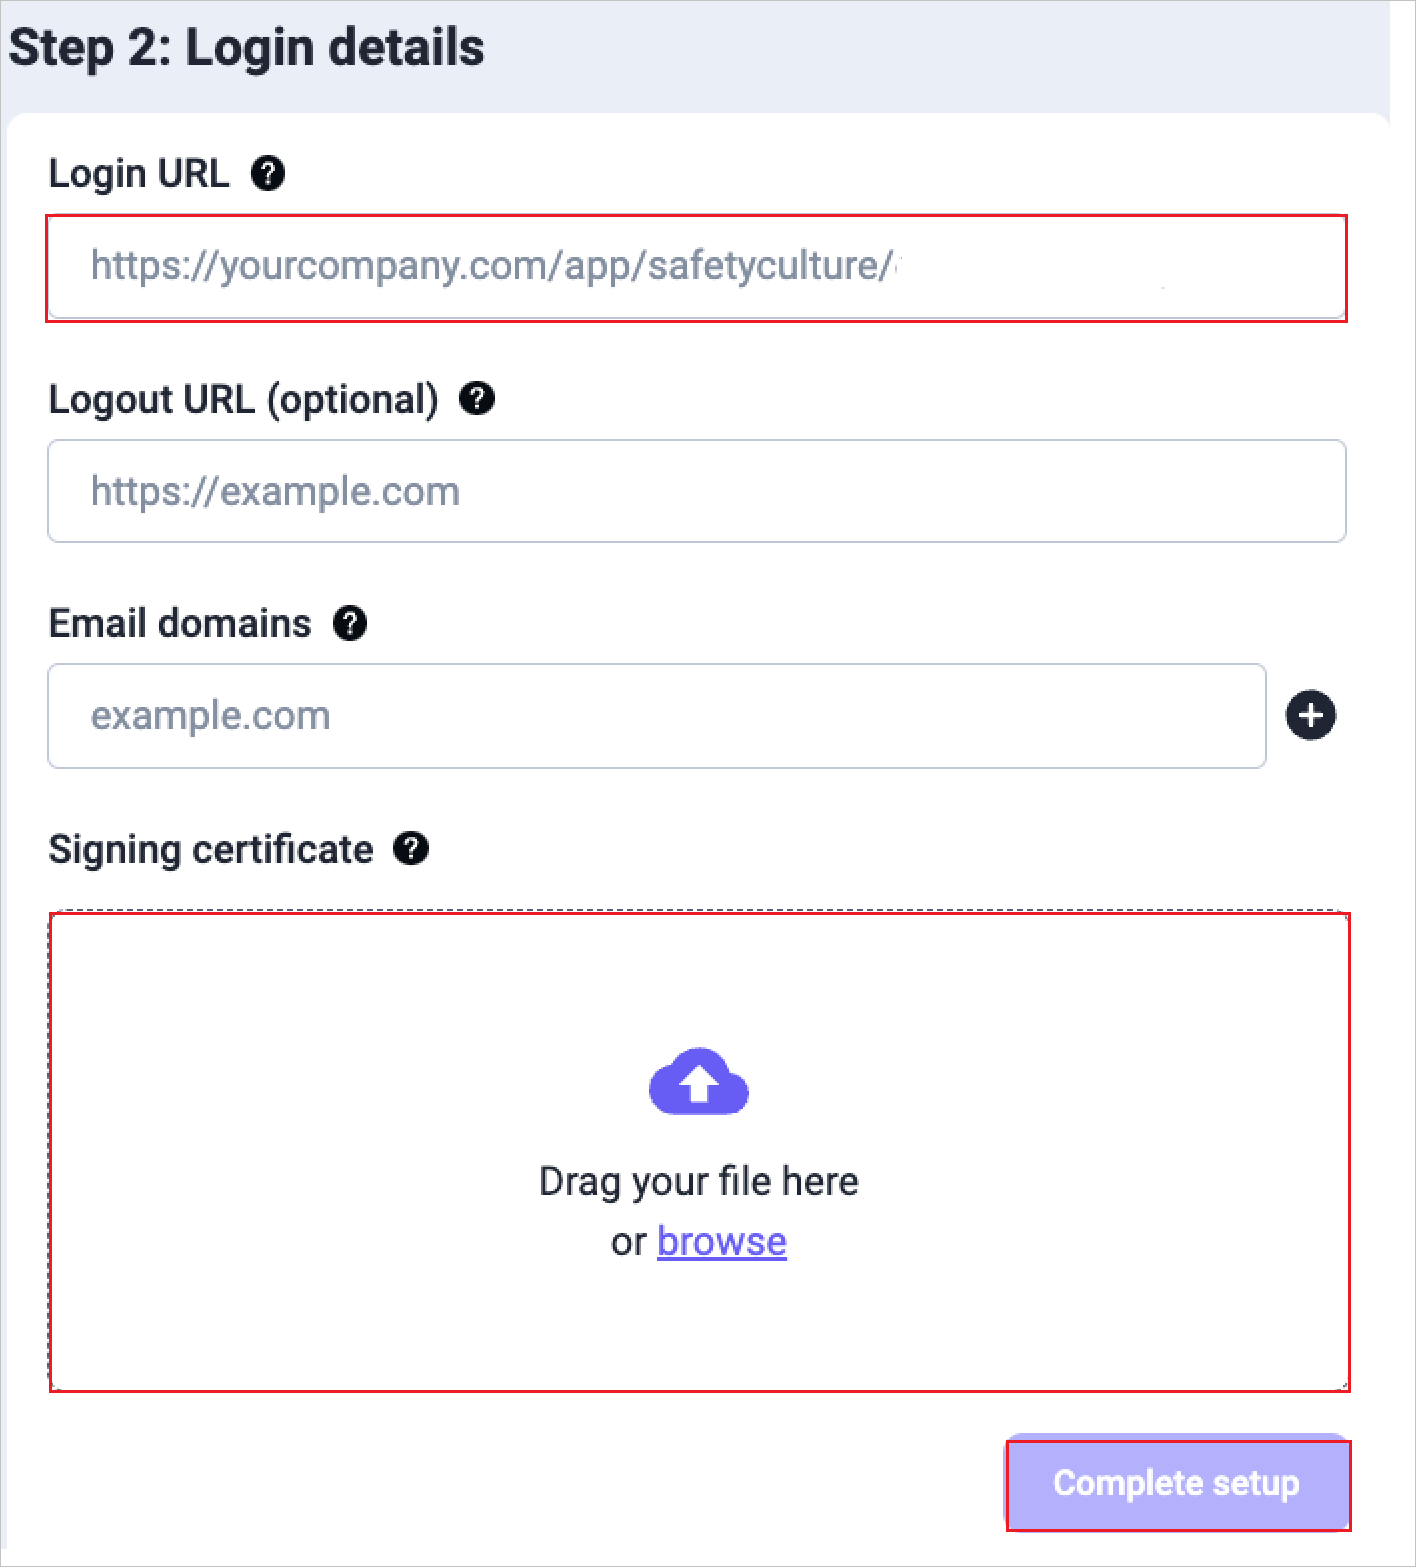 Screenshot shows the login details step of SafetyCulture's SSO setup.